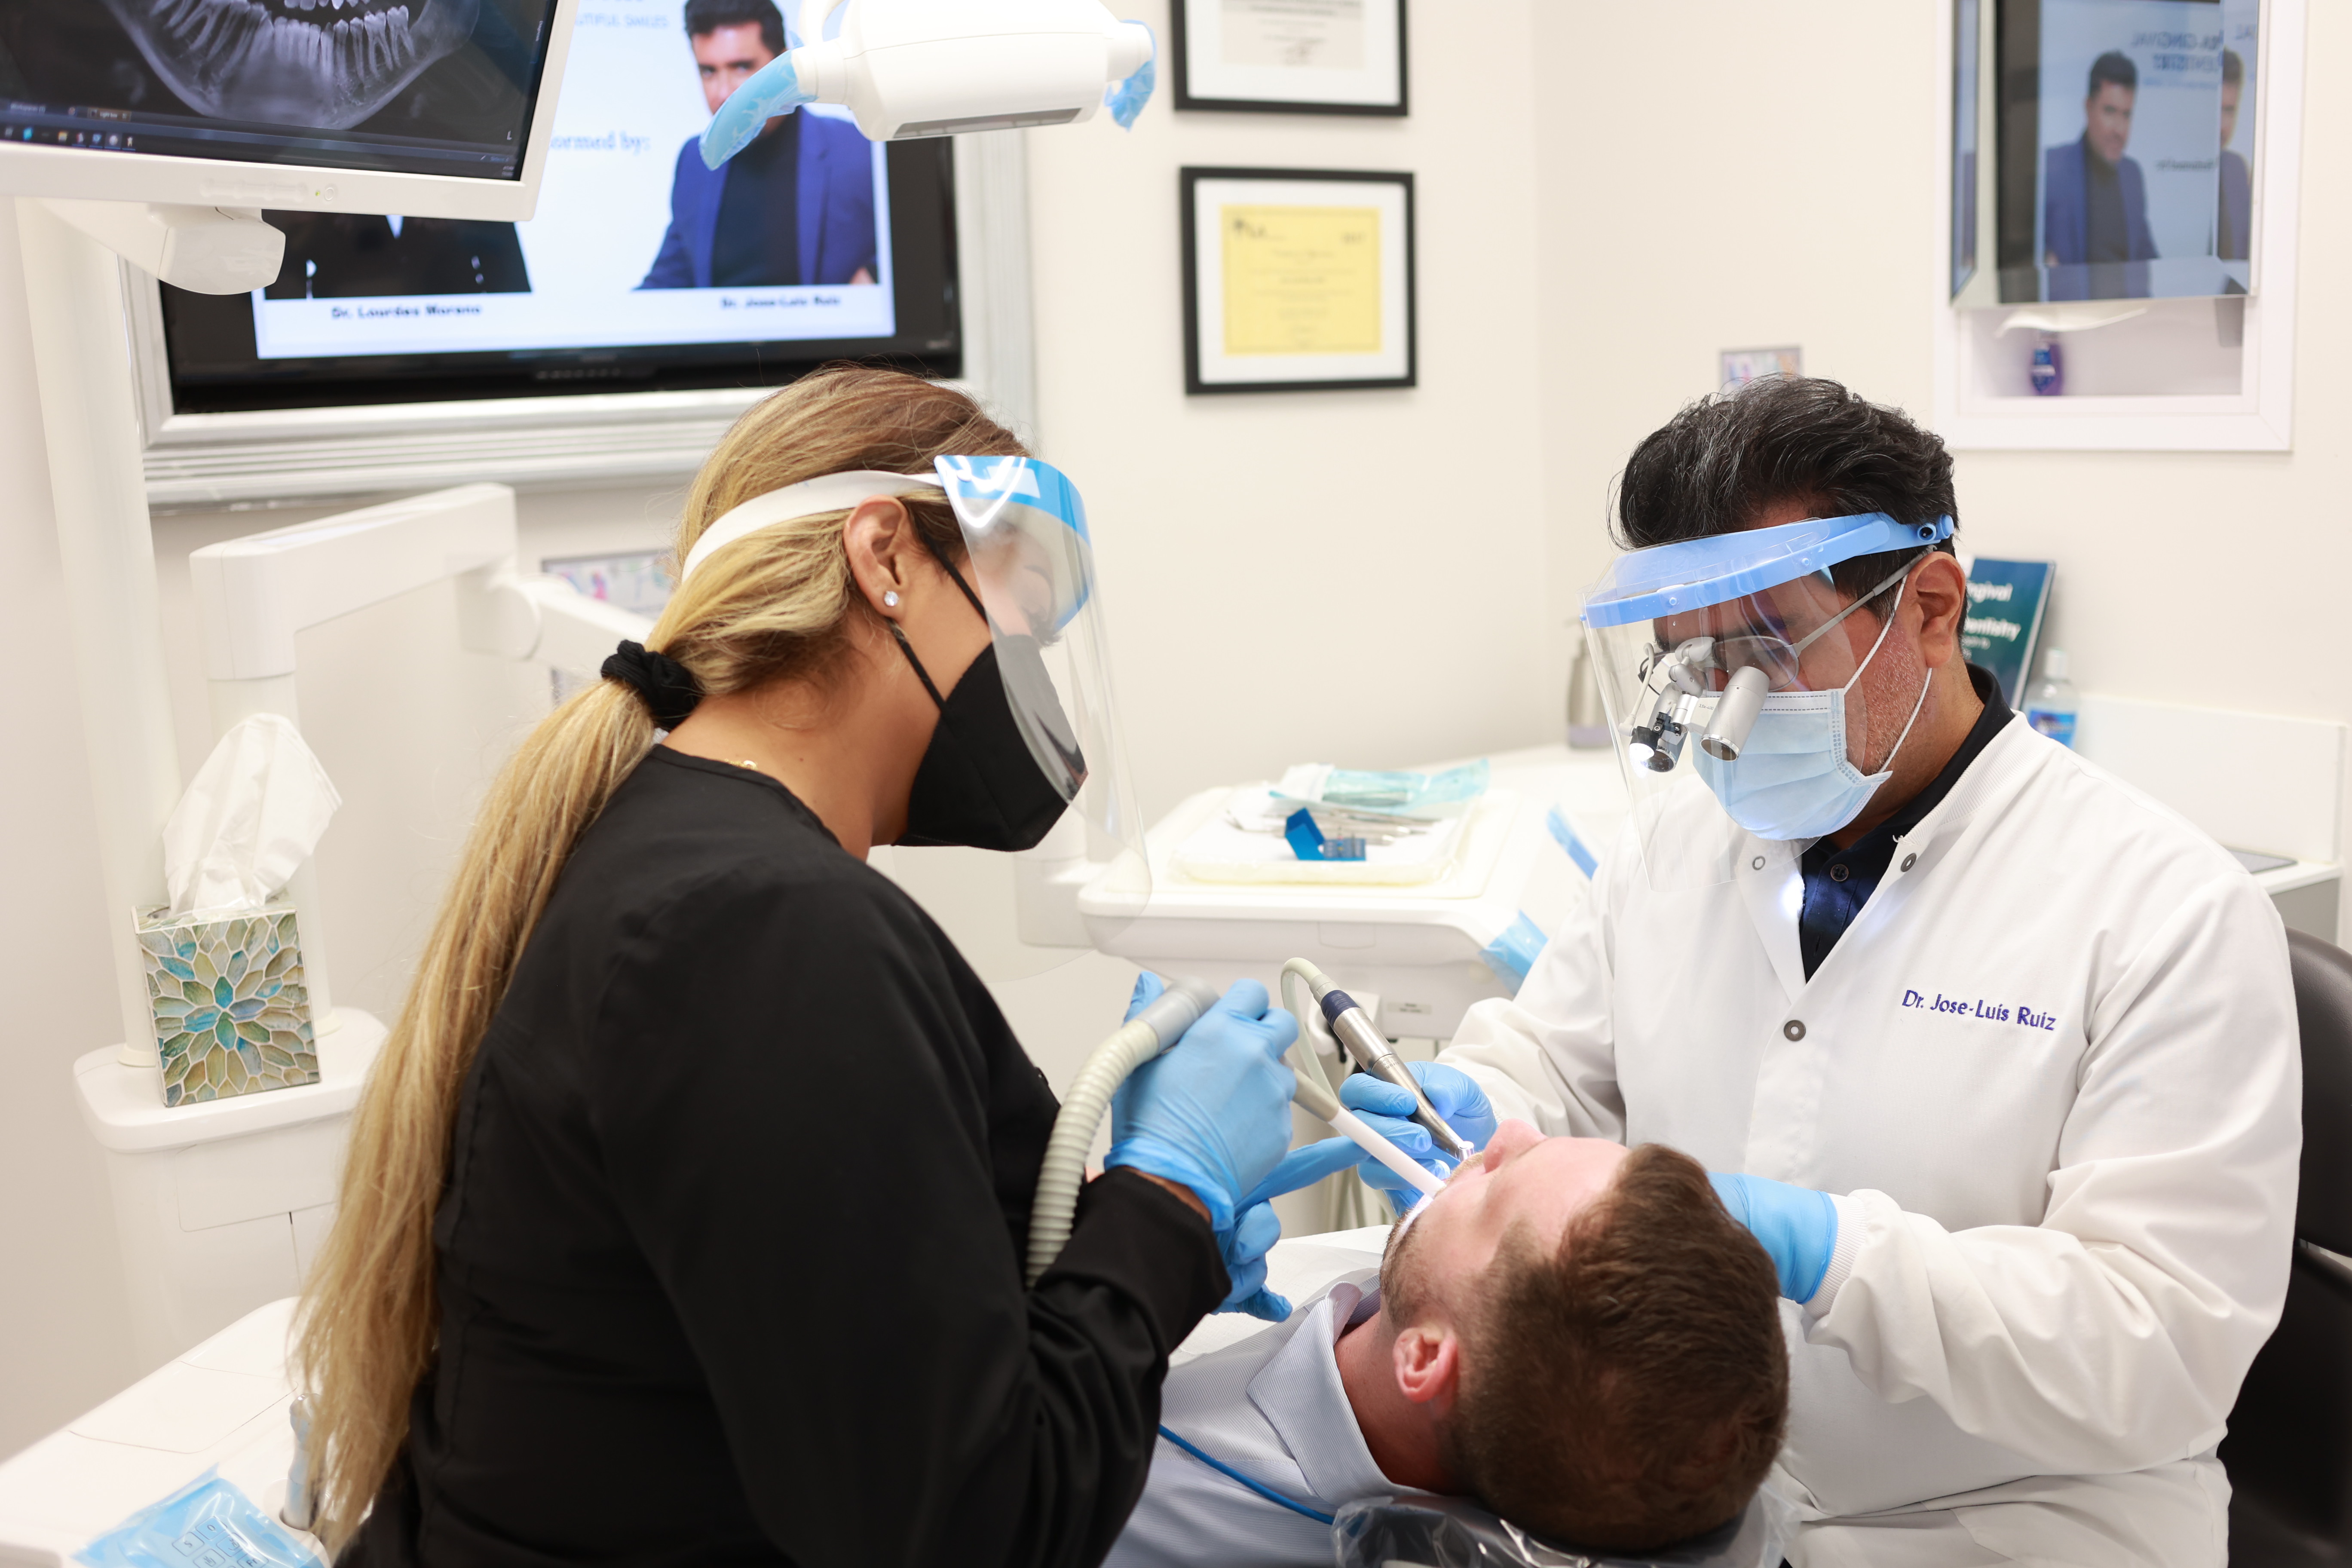 Studio City dentist and dental team member treating a patient